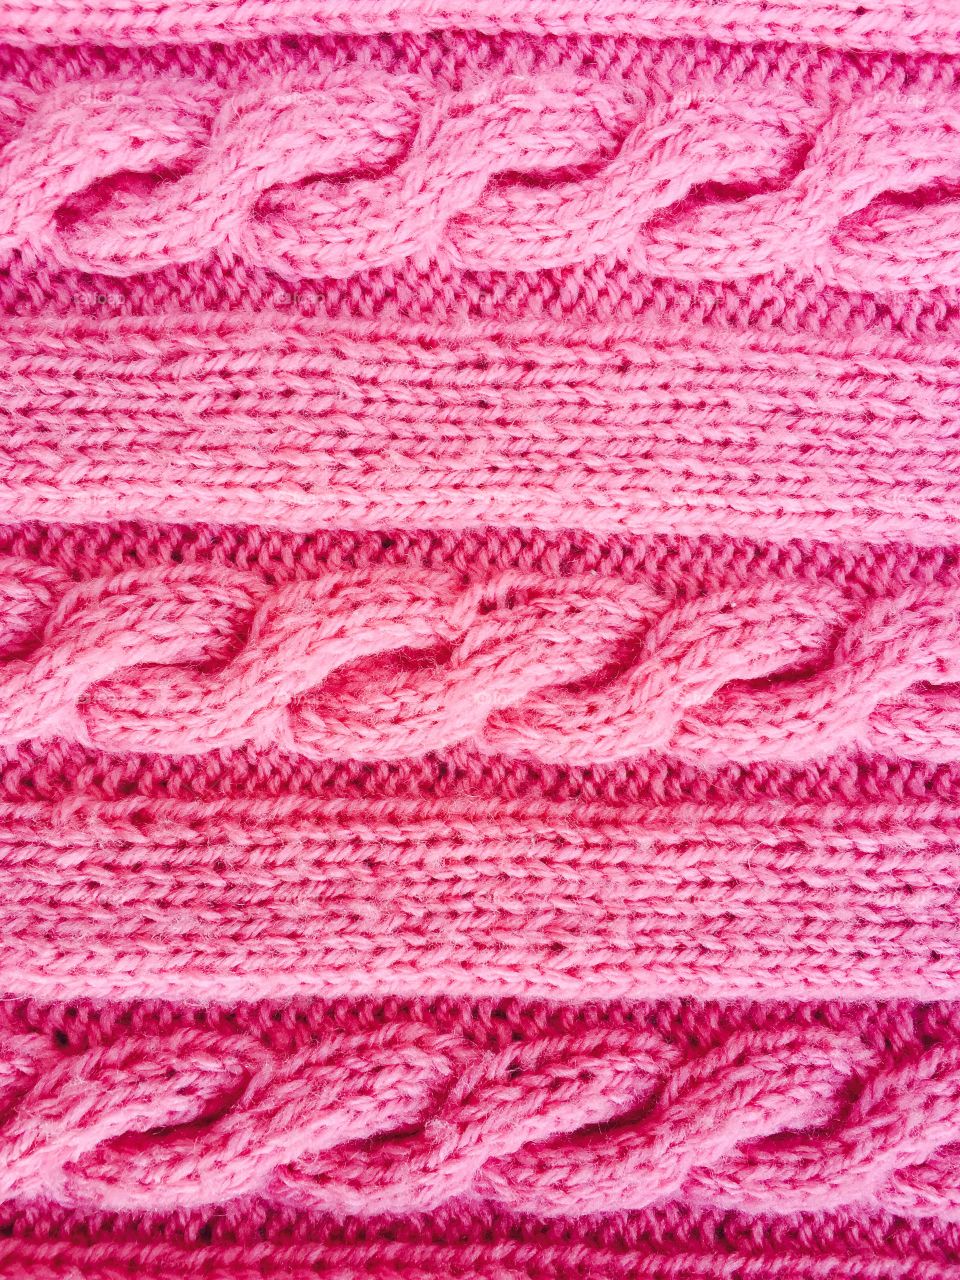 PINK CABLE KNIT